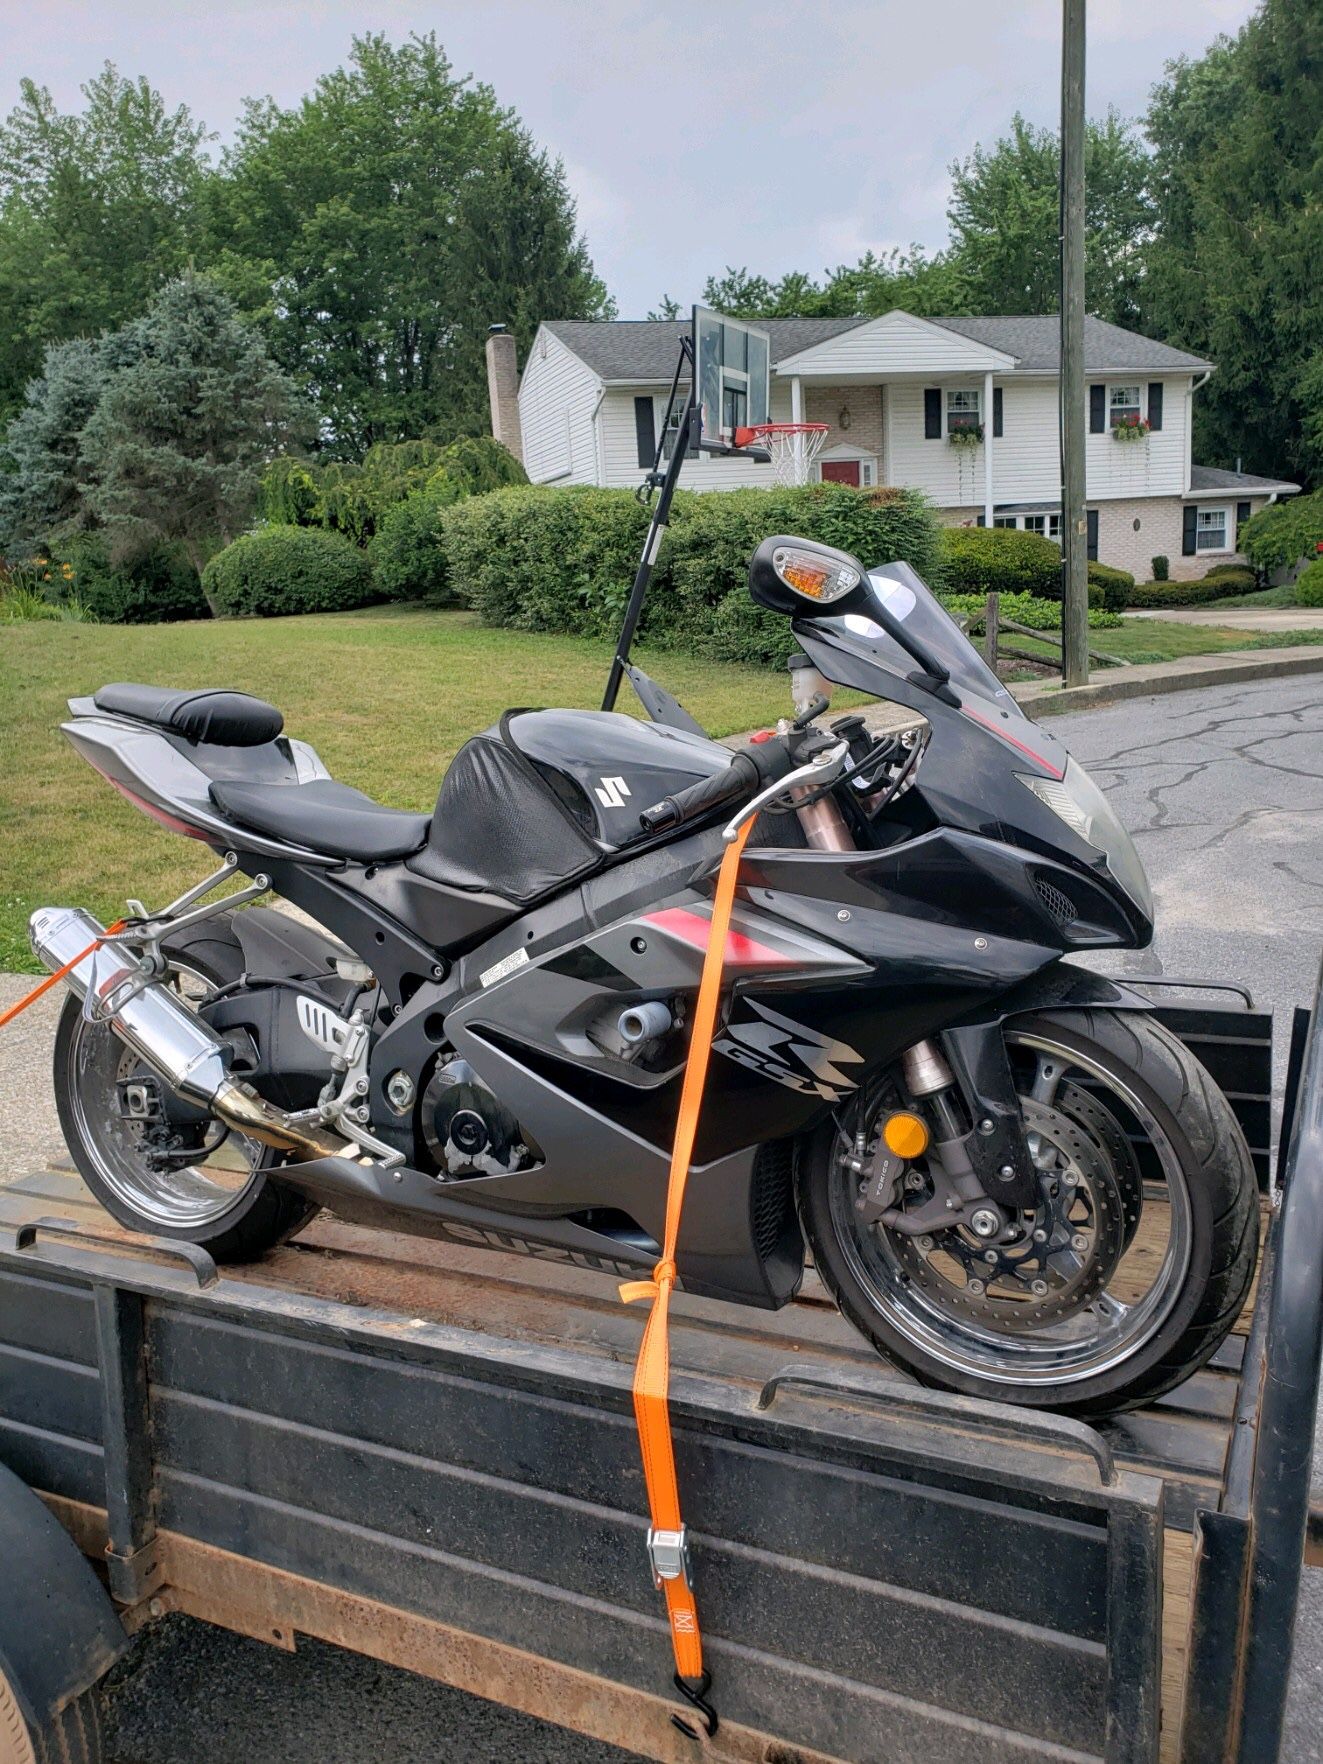 2005 Gsxr 1000 chassis